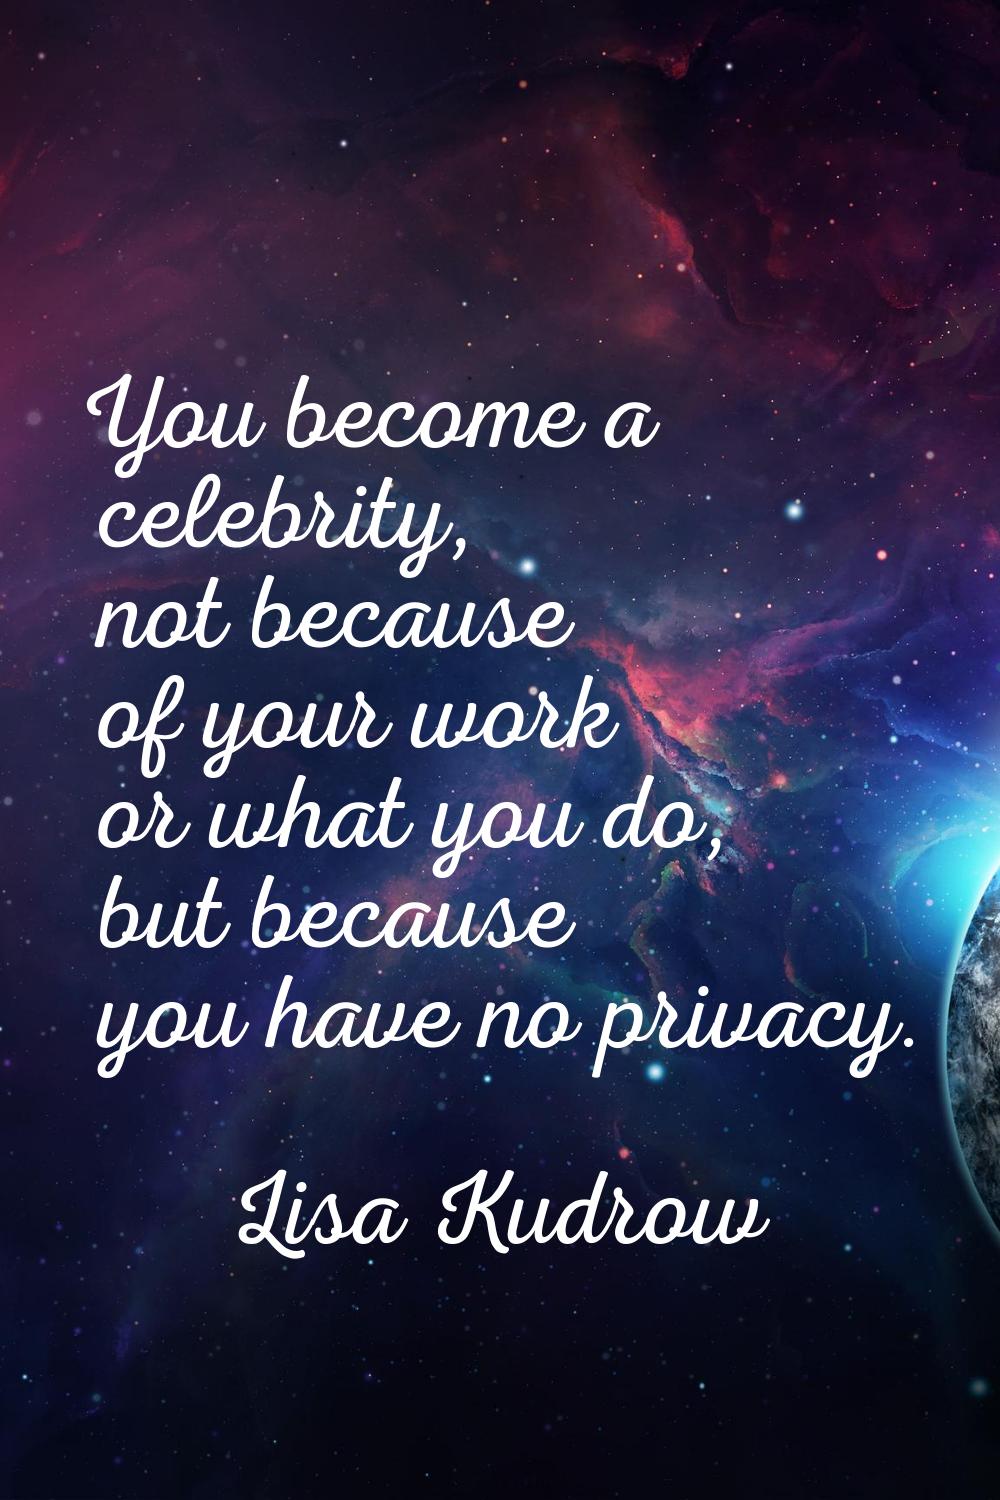 You become a celebrity, not because of your work or what you do, but because you have no privacy.